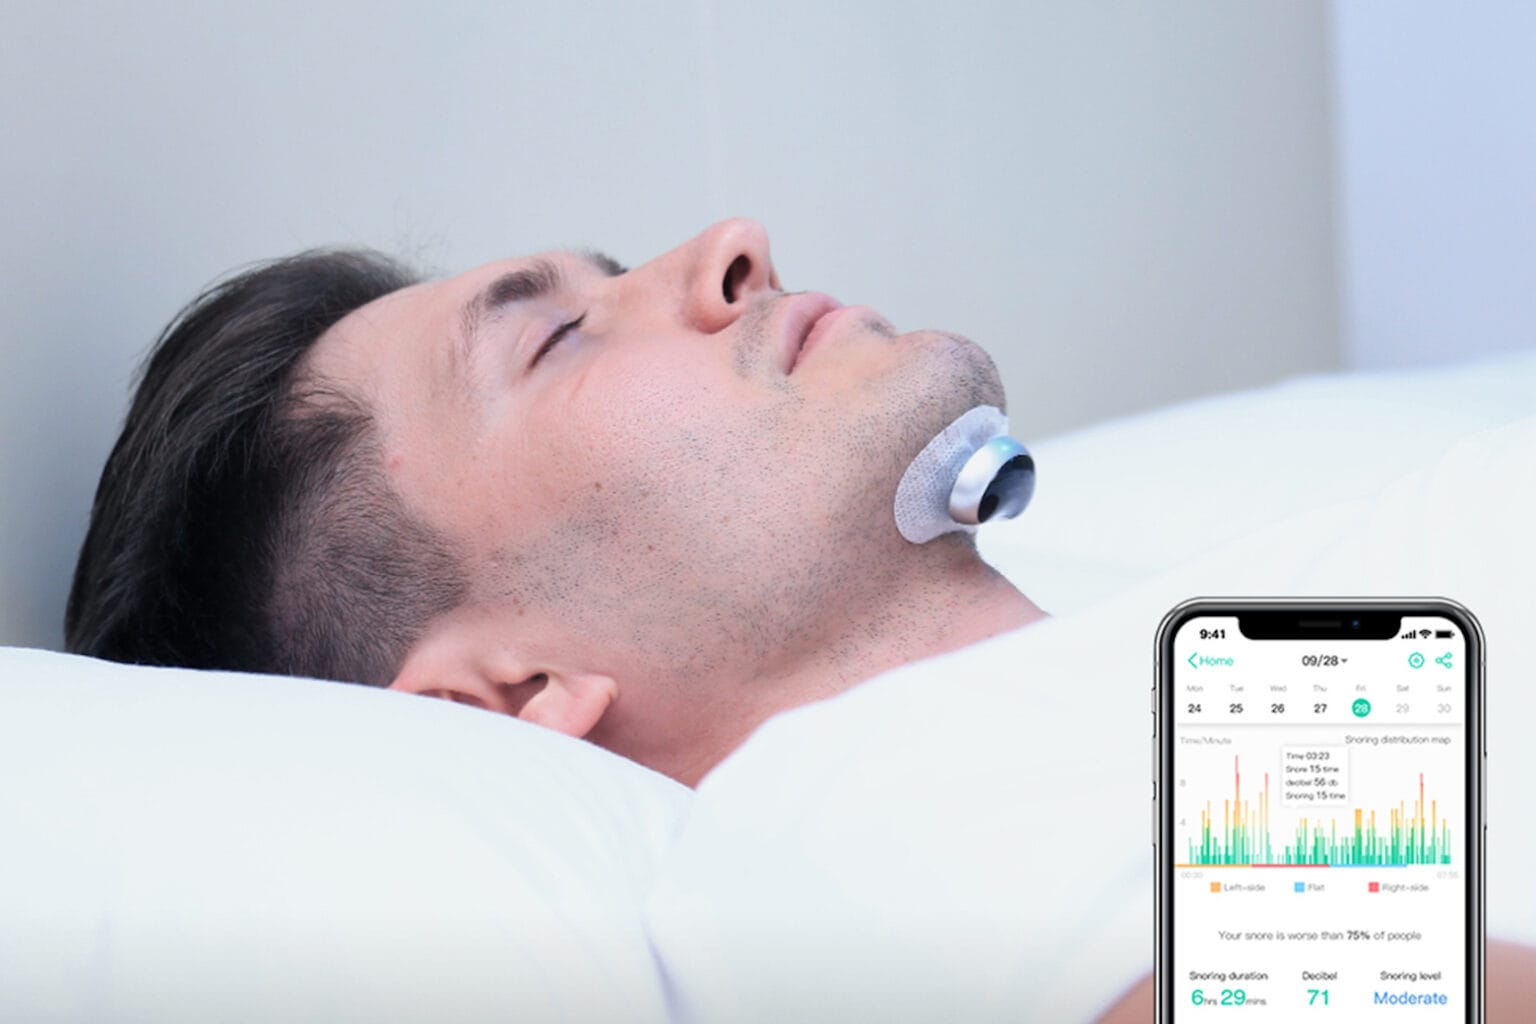 Stop snoring and track your sleep with this iPhone app and gadget combo.